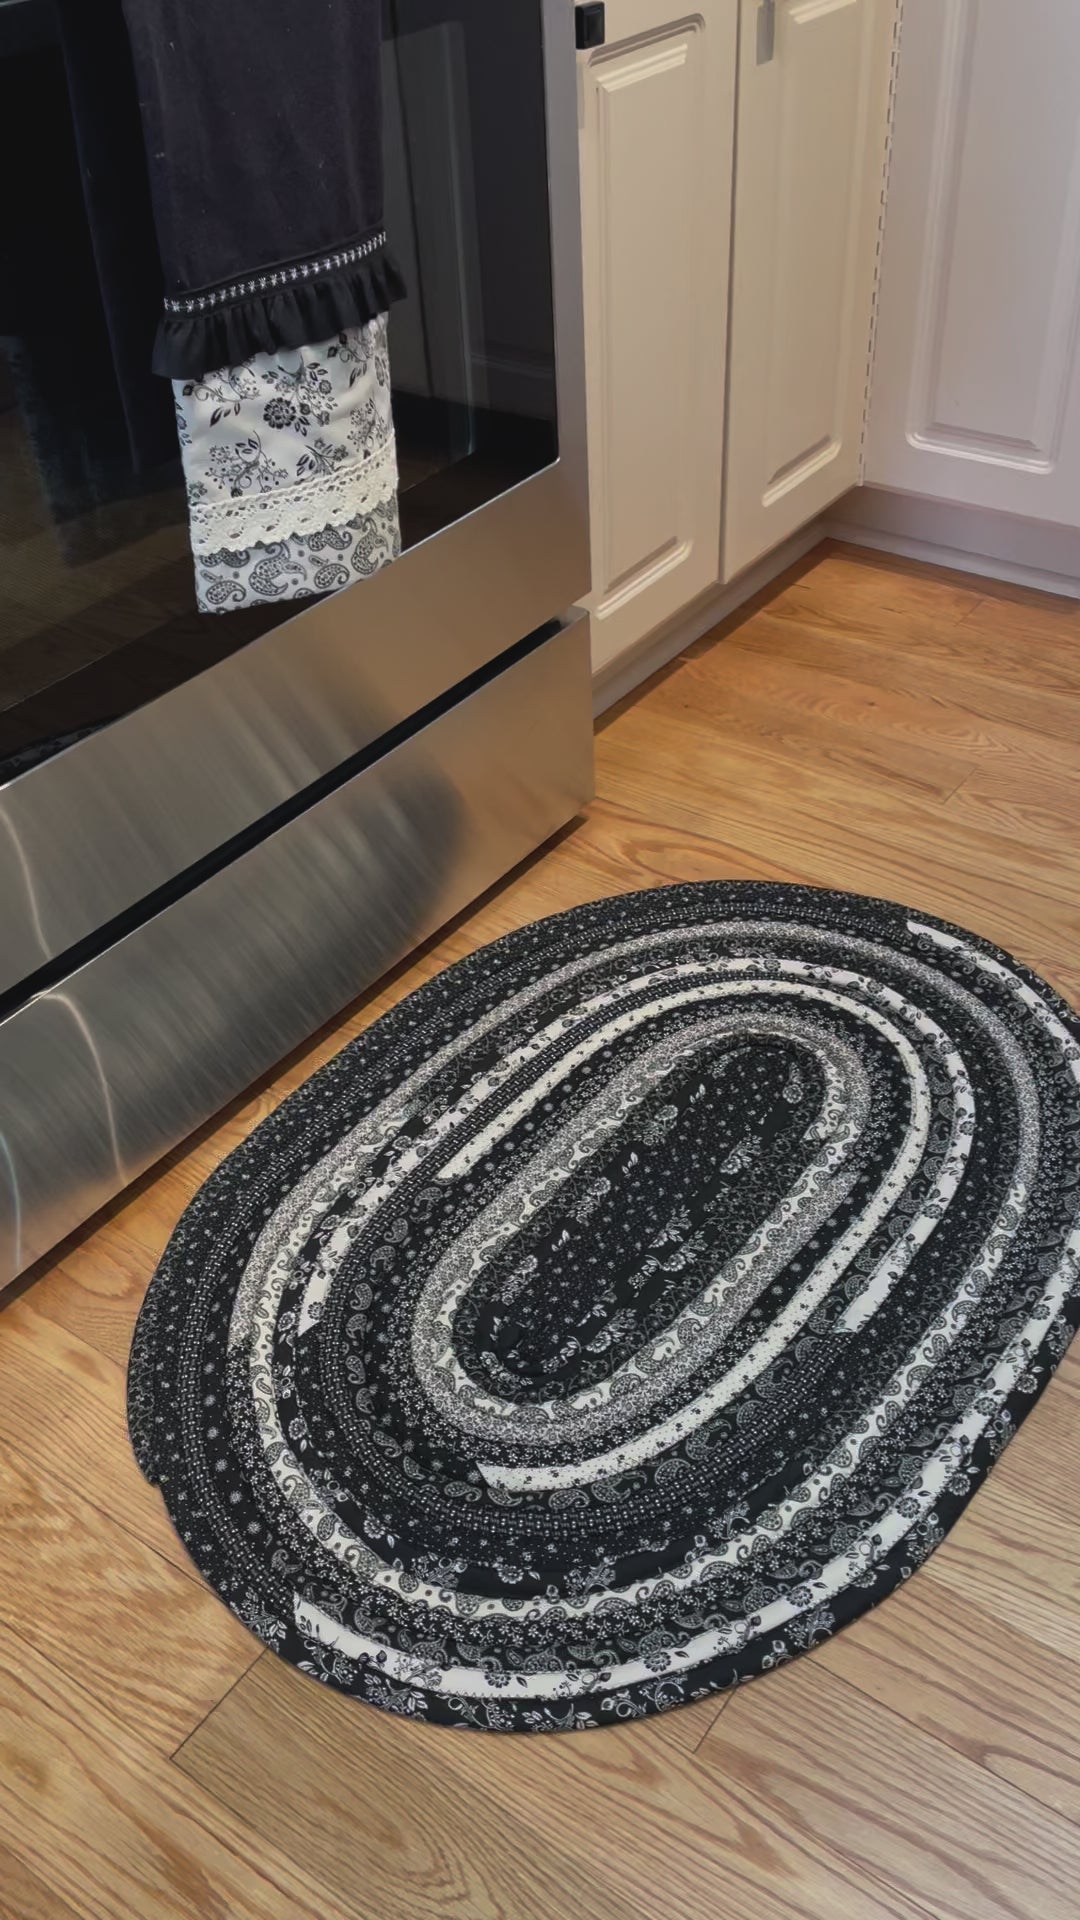 JellyRoll Rug for Kitchen, Bedroom or bathmat. Washable and reversible this handmade modern farmhouse JellyRoll Rug is made from premium quilting materials and cotton/poly batting.  Our batting is handcut for premium loft and durability. Handmade Rug